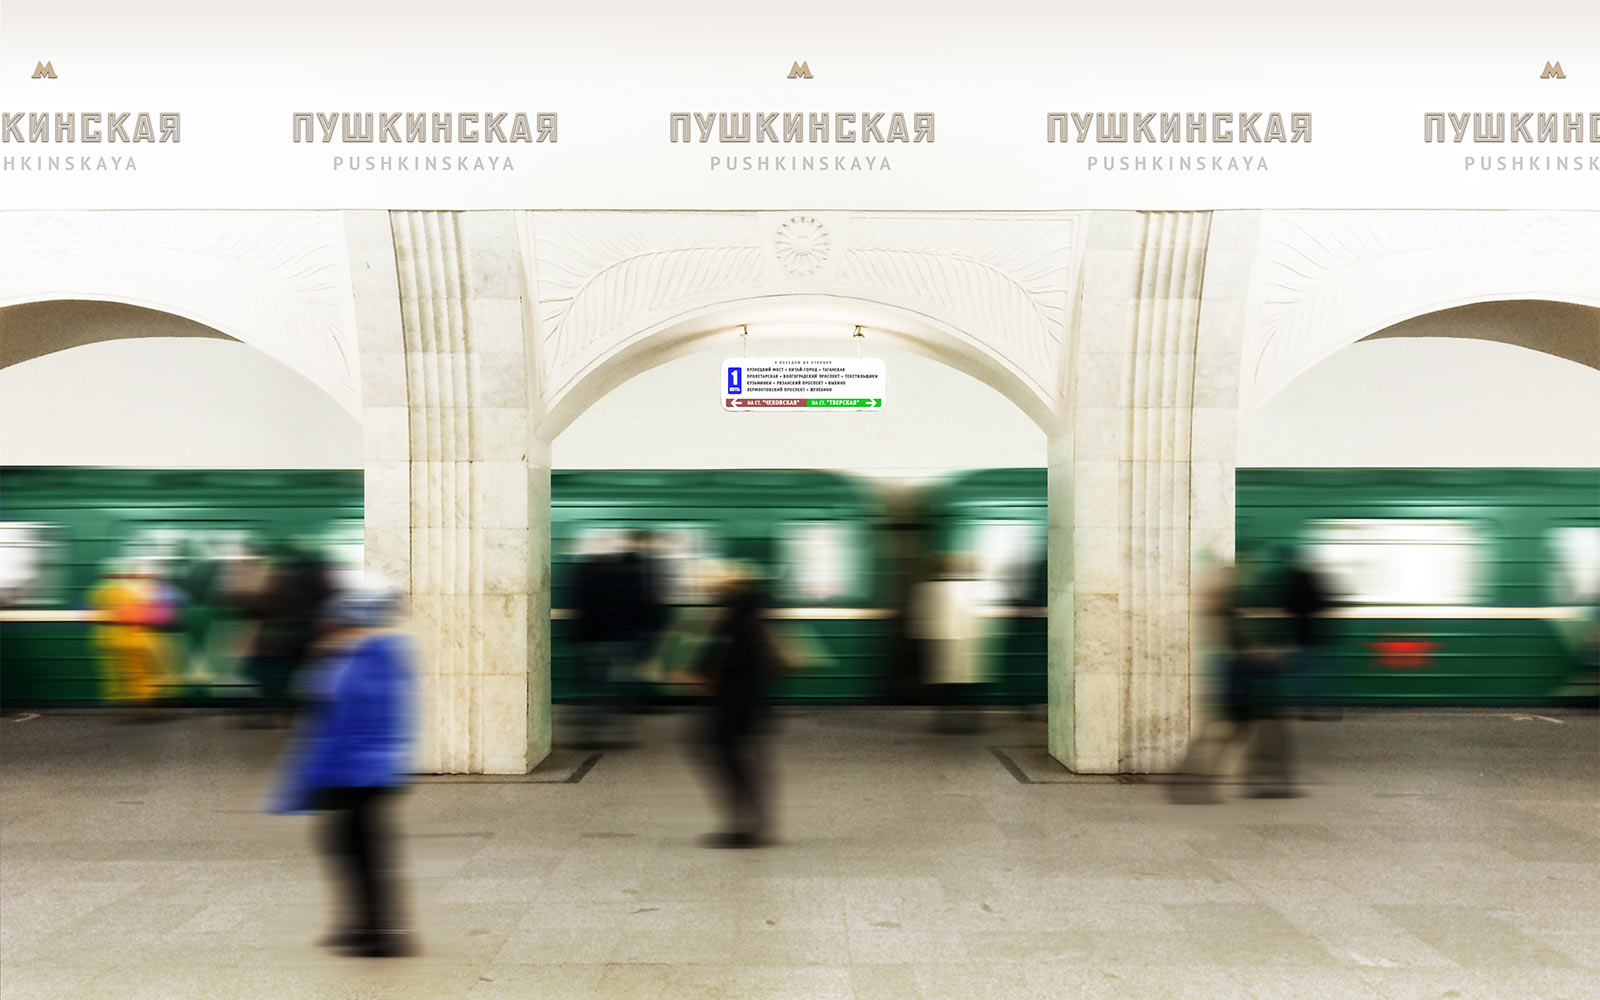 Moscow Metro station names multiplication